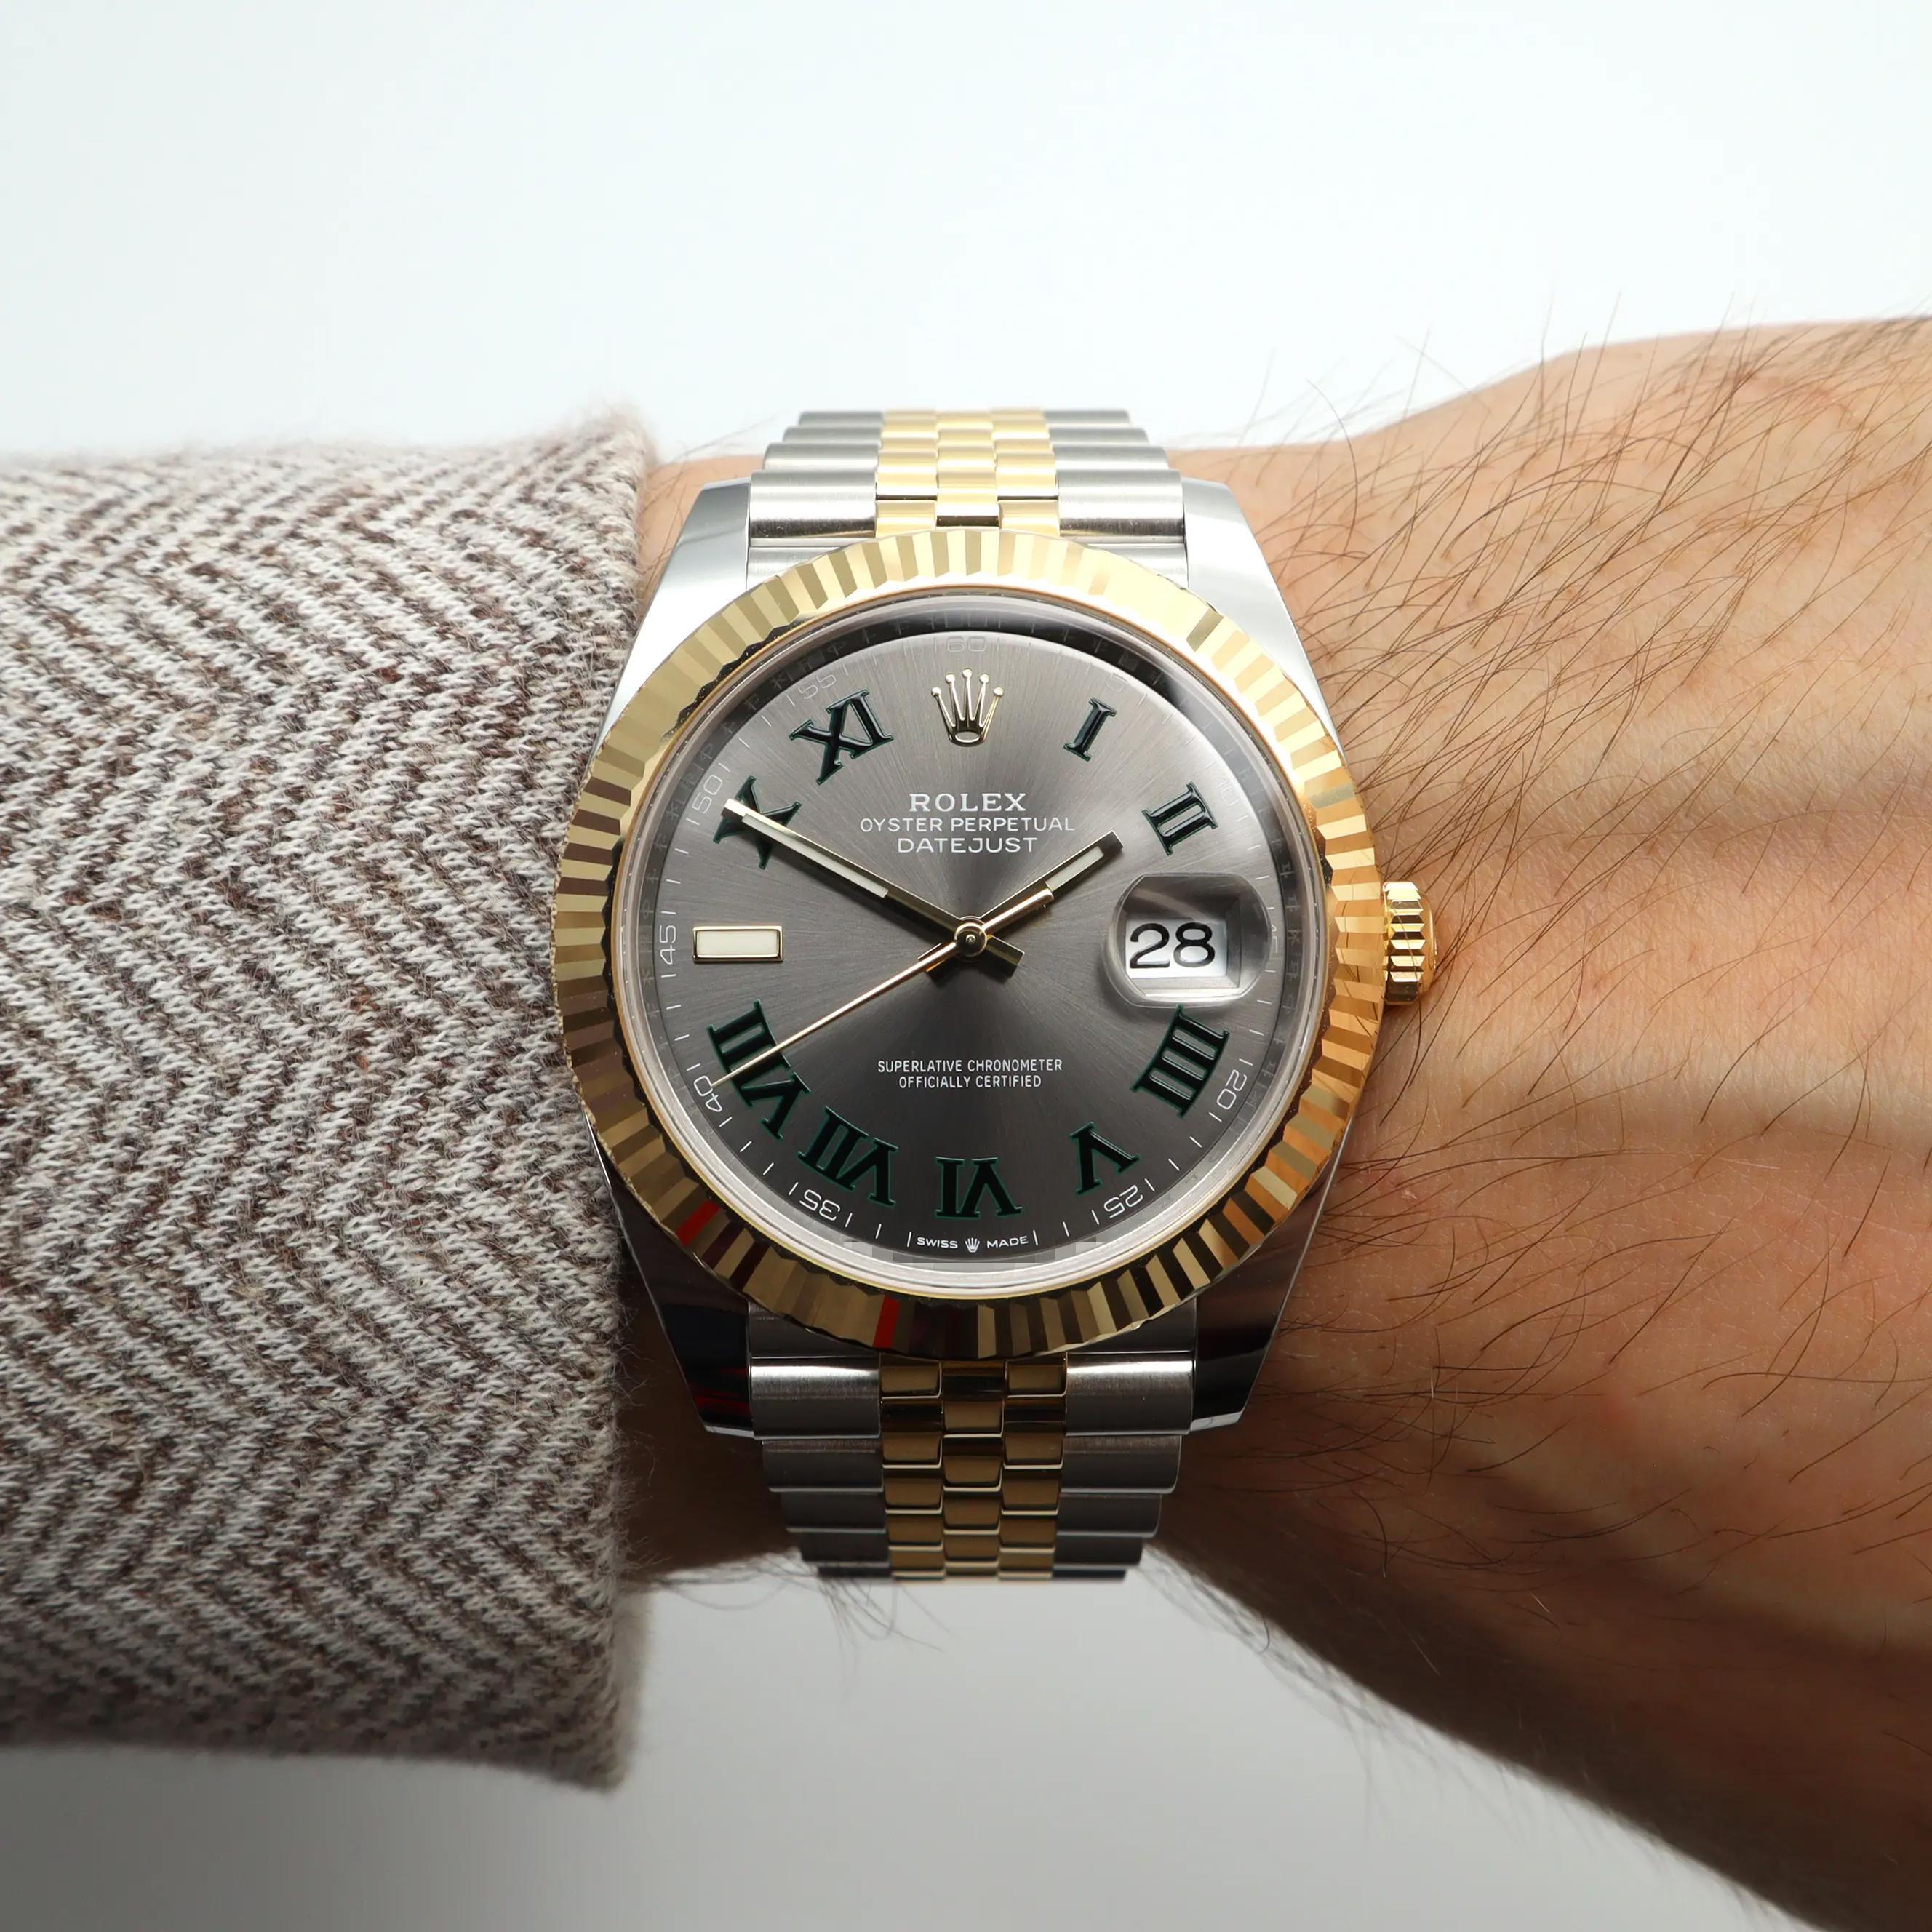 NEW Rolex Datejust 41mm 18k Yellow Gold Steel Slate Wimbledon Dial Watch 126333 For Sale 2